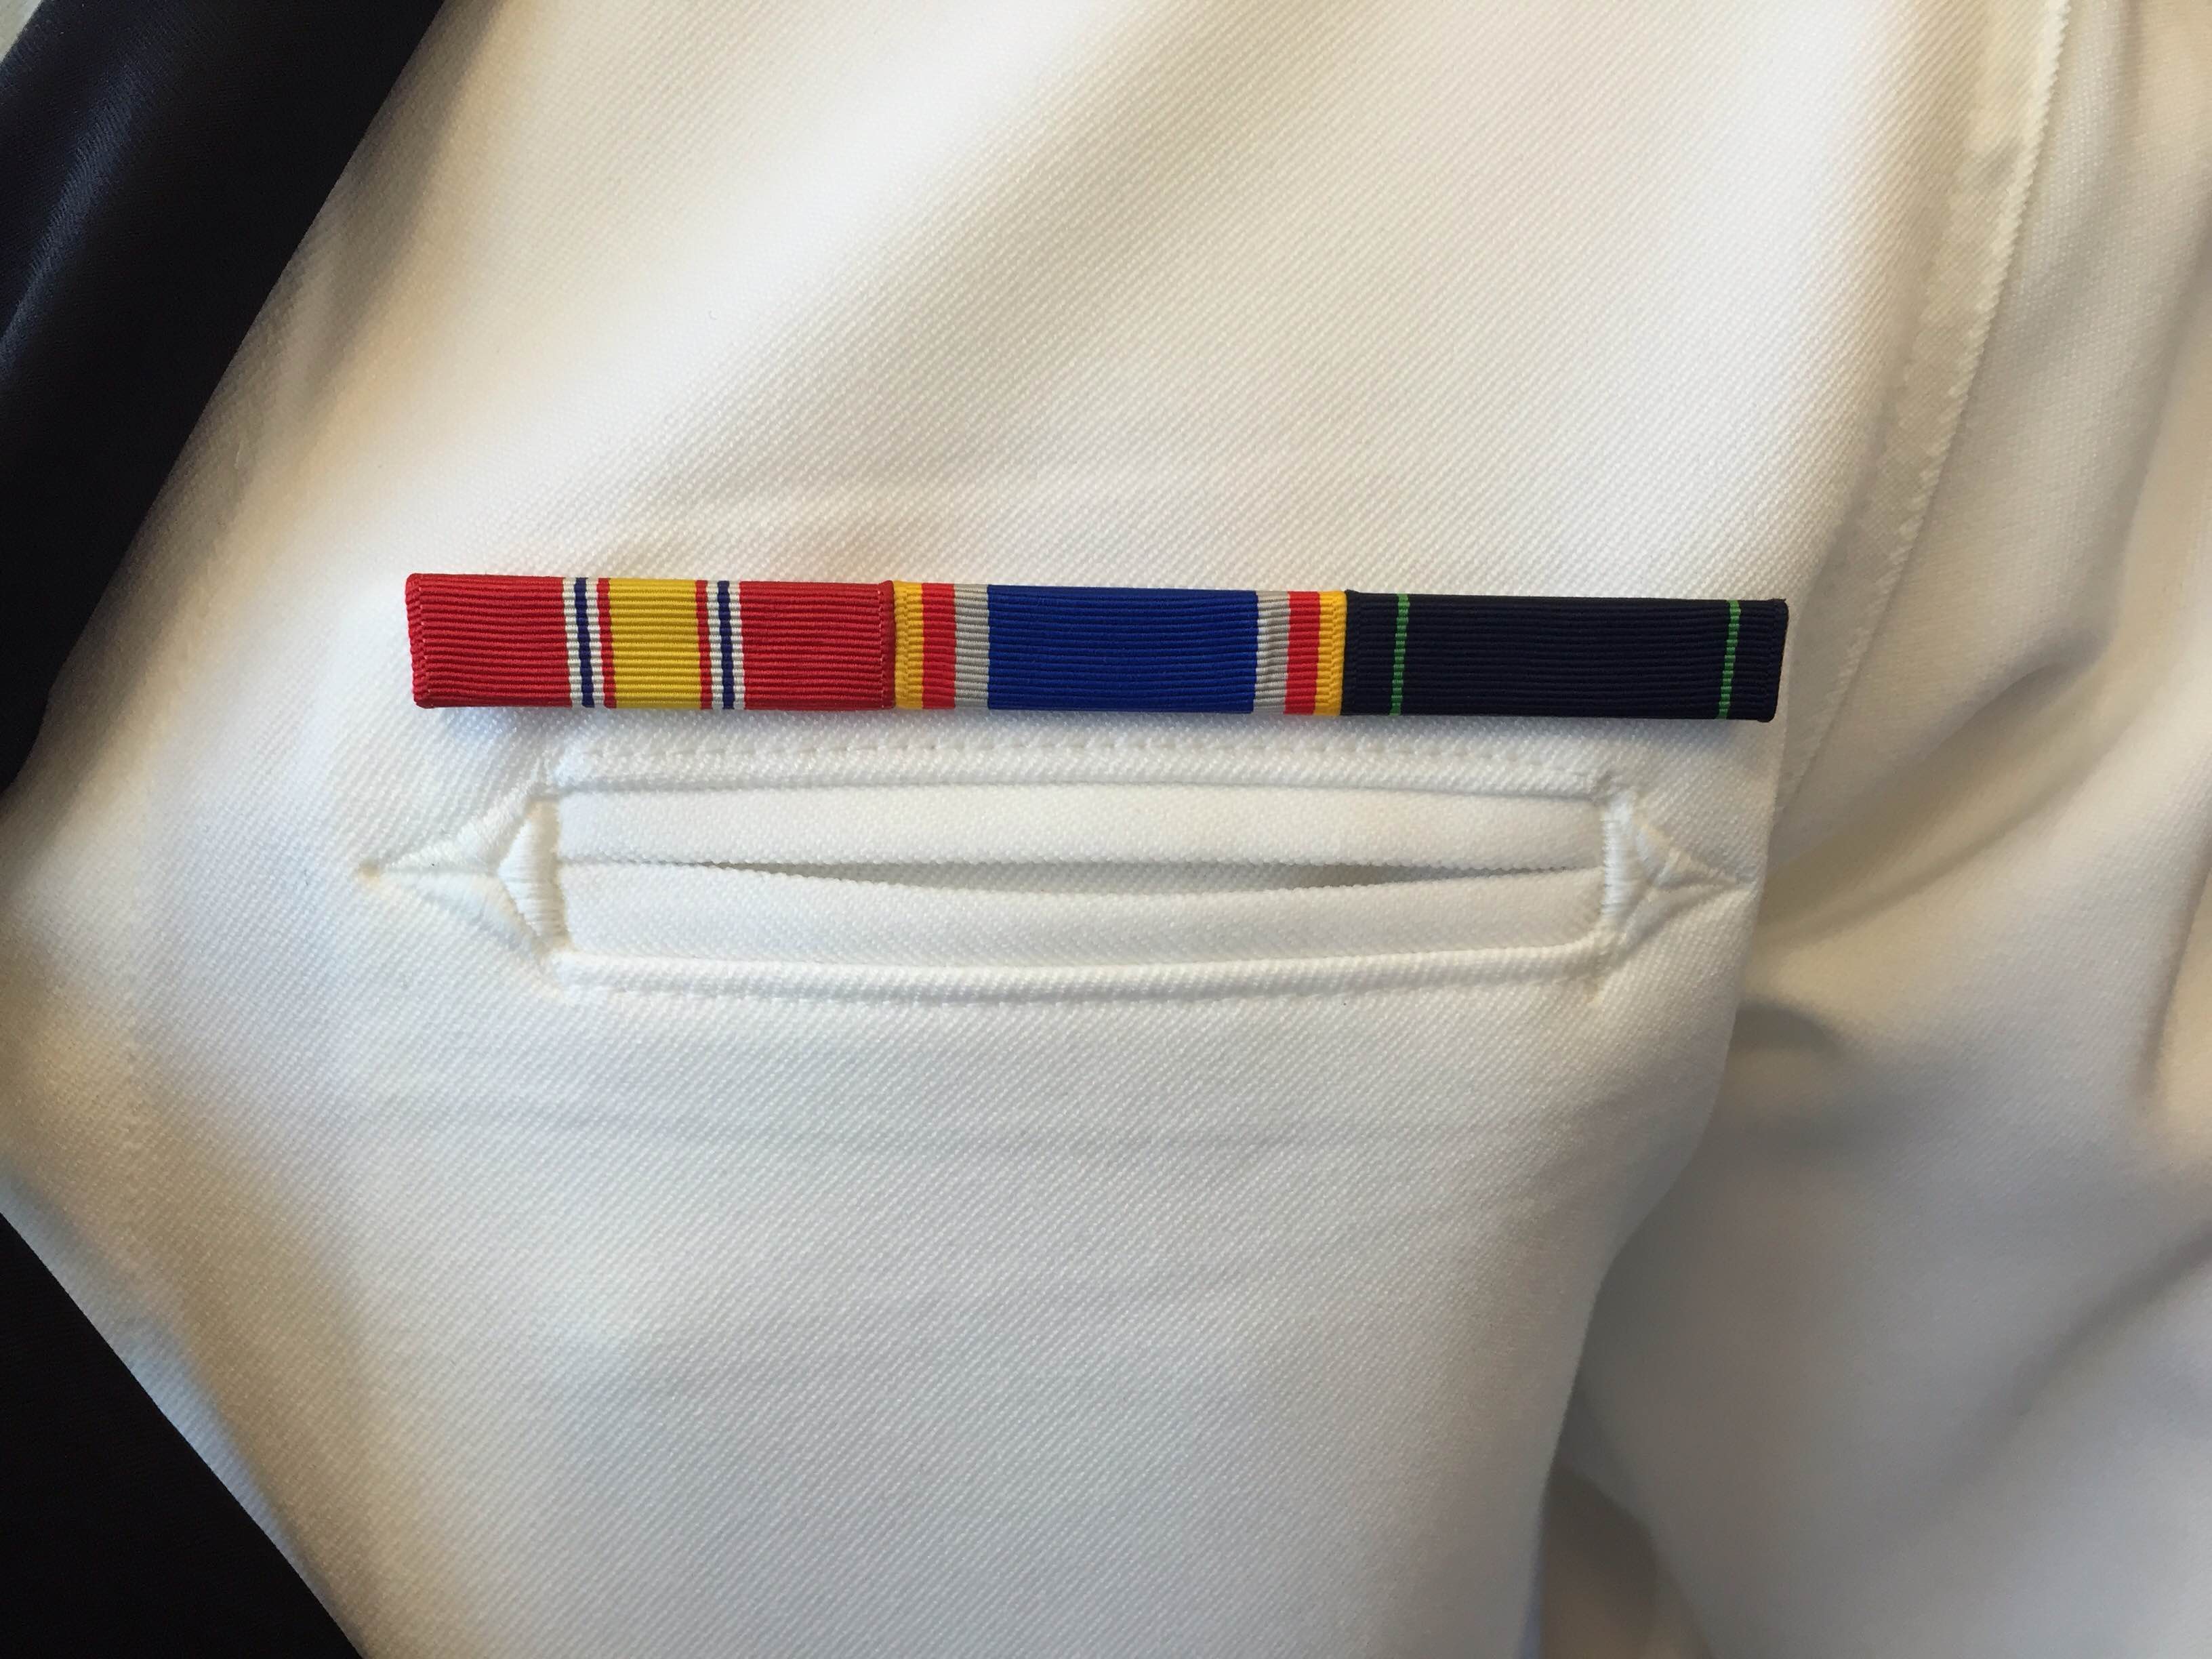 New ribbon unveiled for Navy boot camp's best